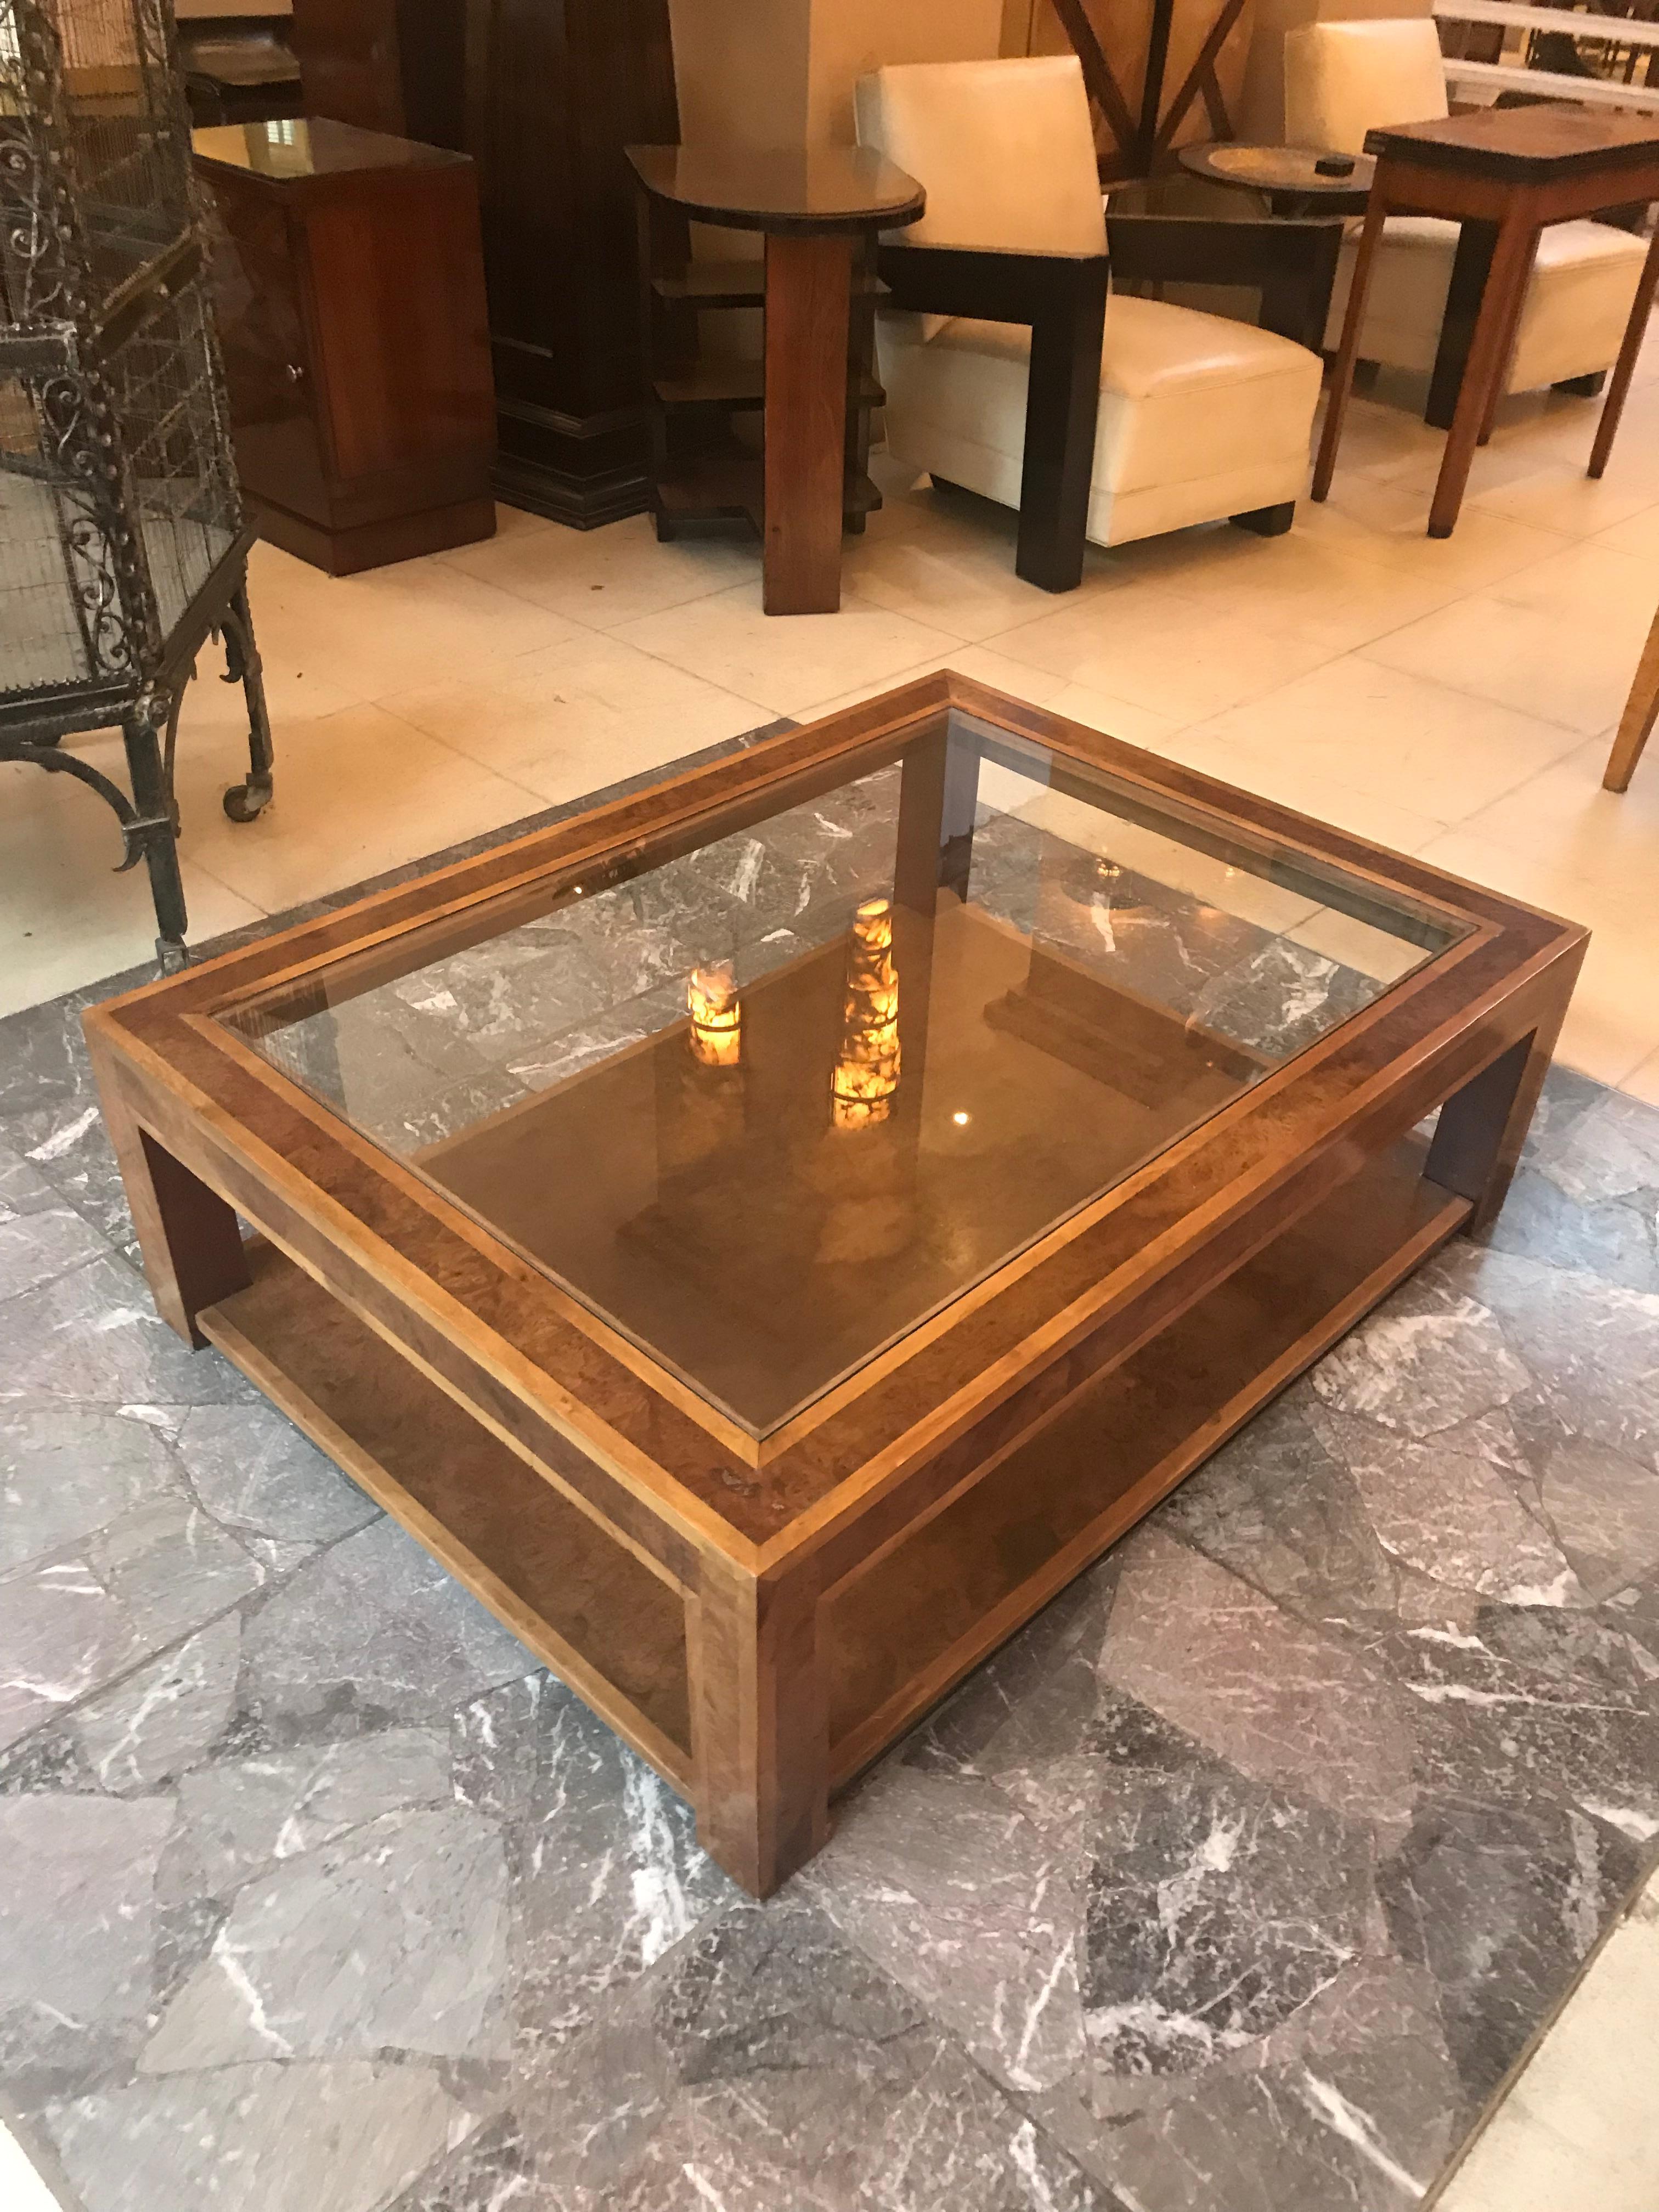 Coffe table

Material: Wood and glass
Style: Art Deco
We have specialized in the sale of Art Deco and Art Nouveau styles since 1982.If you have any questions we are at your disposal.
Pushing the button that reads 'View All From Seller'. And you can